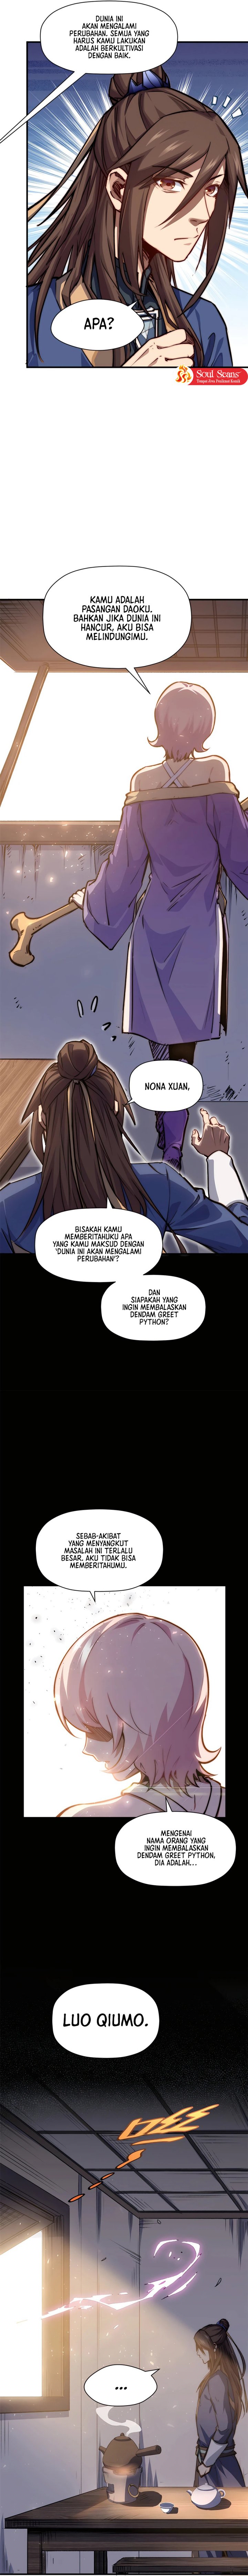 Dilarang COPAS - situs resmi www.mangacanblog.com - Komik top tier providence secretly cultivate for a thousand years 116 - chapter 116 117 Indonesia top tier providence secretly cultivate for a thousand years 116 - chapter 116 Terbaru 6|Baca Manga Komik Indonesia|Mangacan